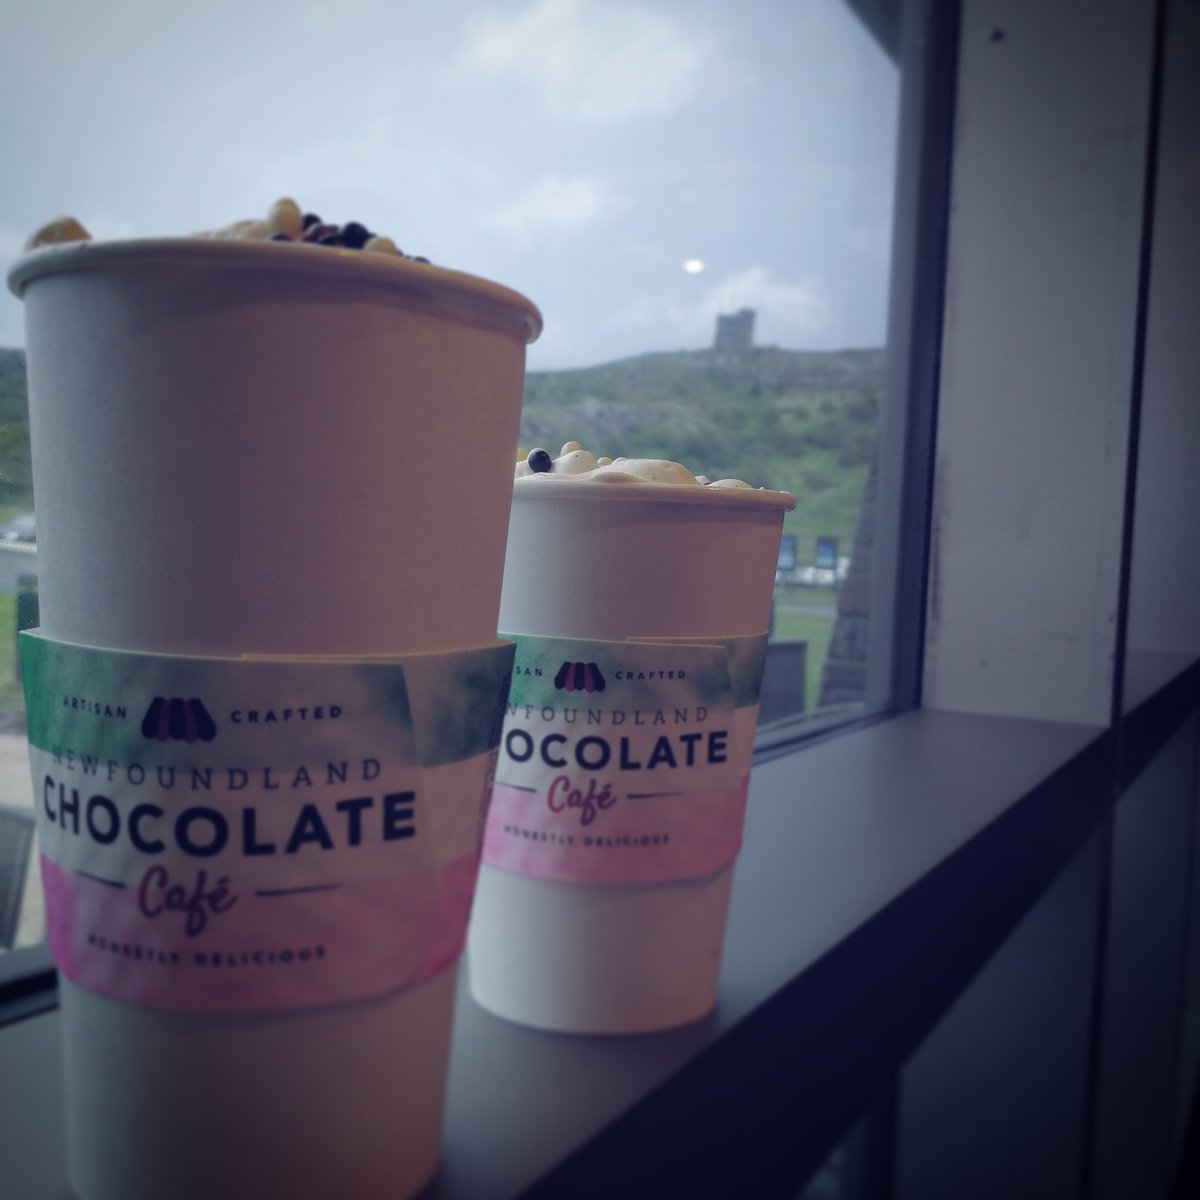 What's better than #enjoying the #finest #hotchocolate in the city with the finest #view in the #city?  Having someone to #share it with 👌

#sharingiscaring #coffee #chocolate #summer #latte #espresso #local #supportlocal #newfoundland #nl #explorenl #SignalHill #CabotTower